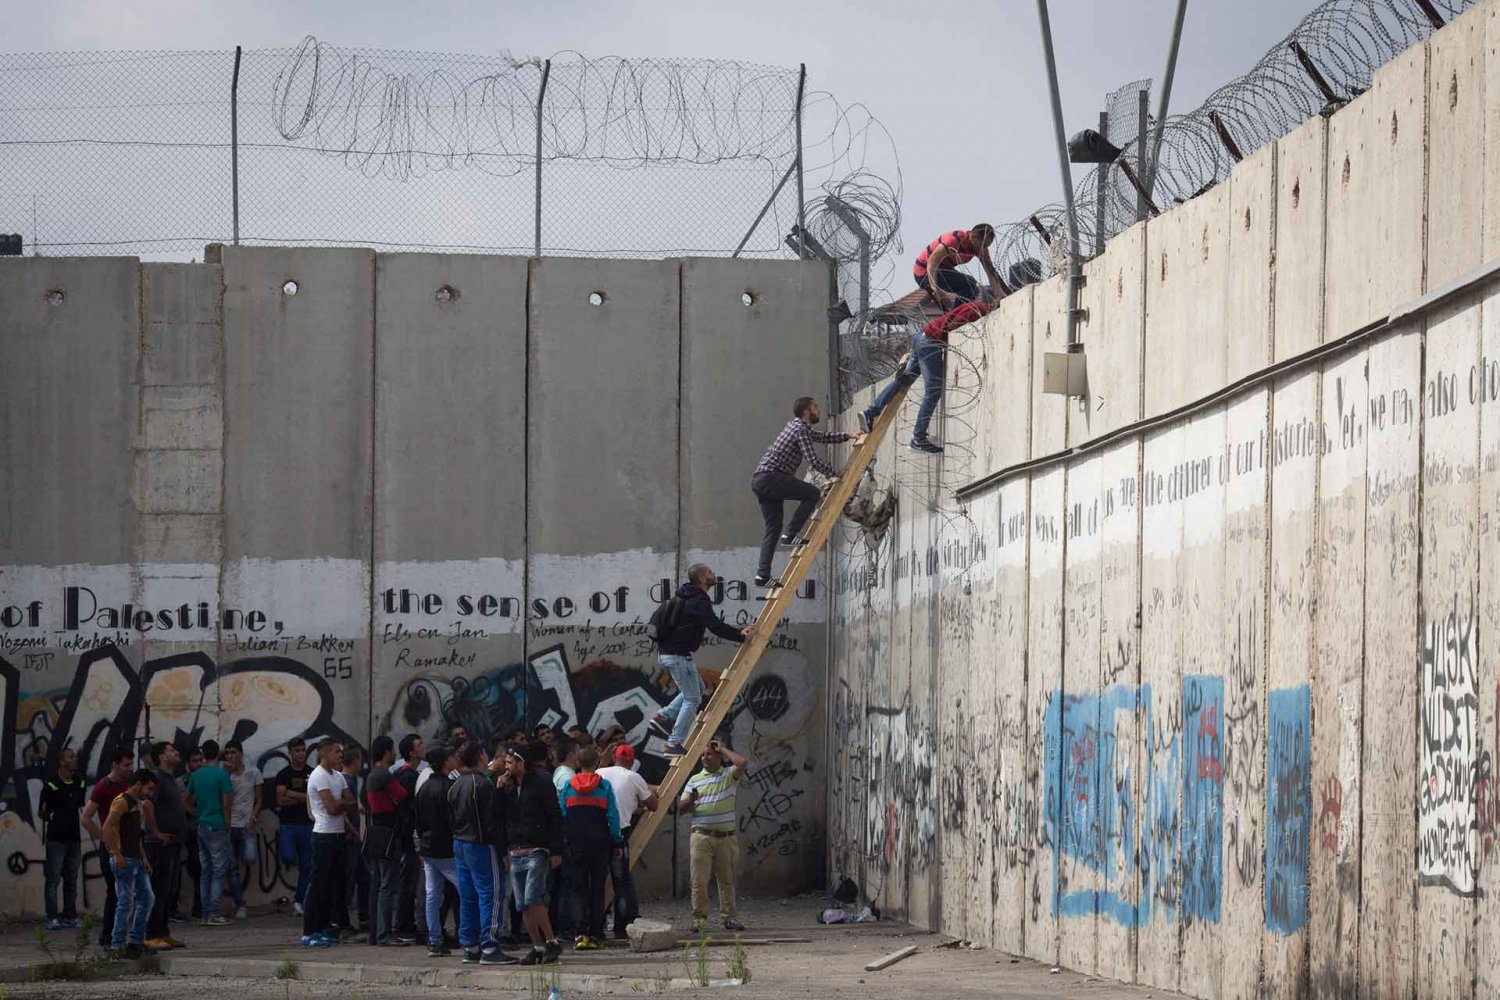 In al-Ram, Palestinians climb over the Separation Wall to reach Jerusalem